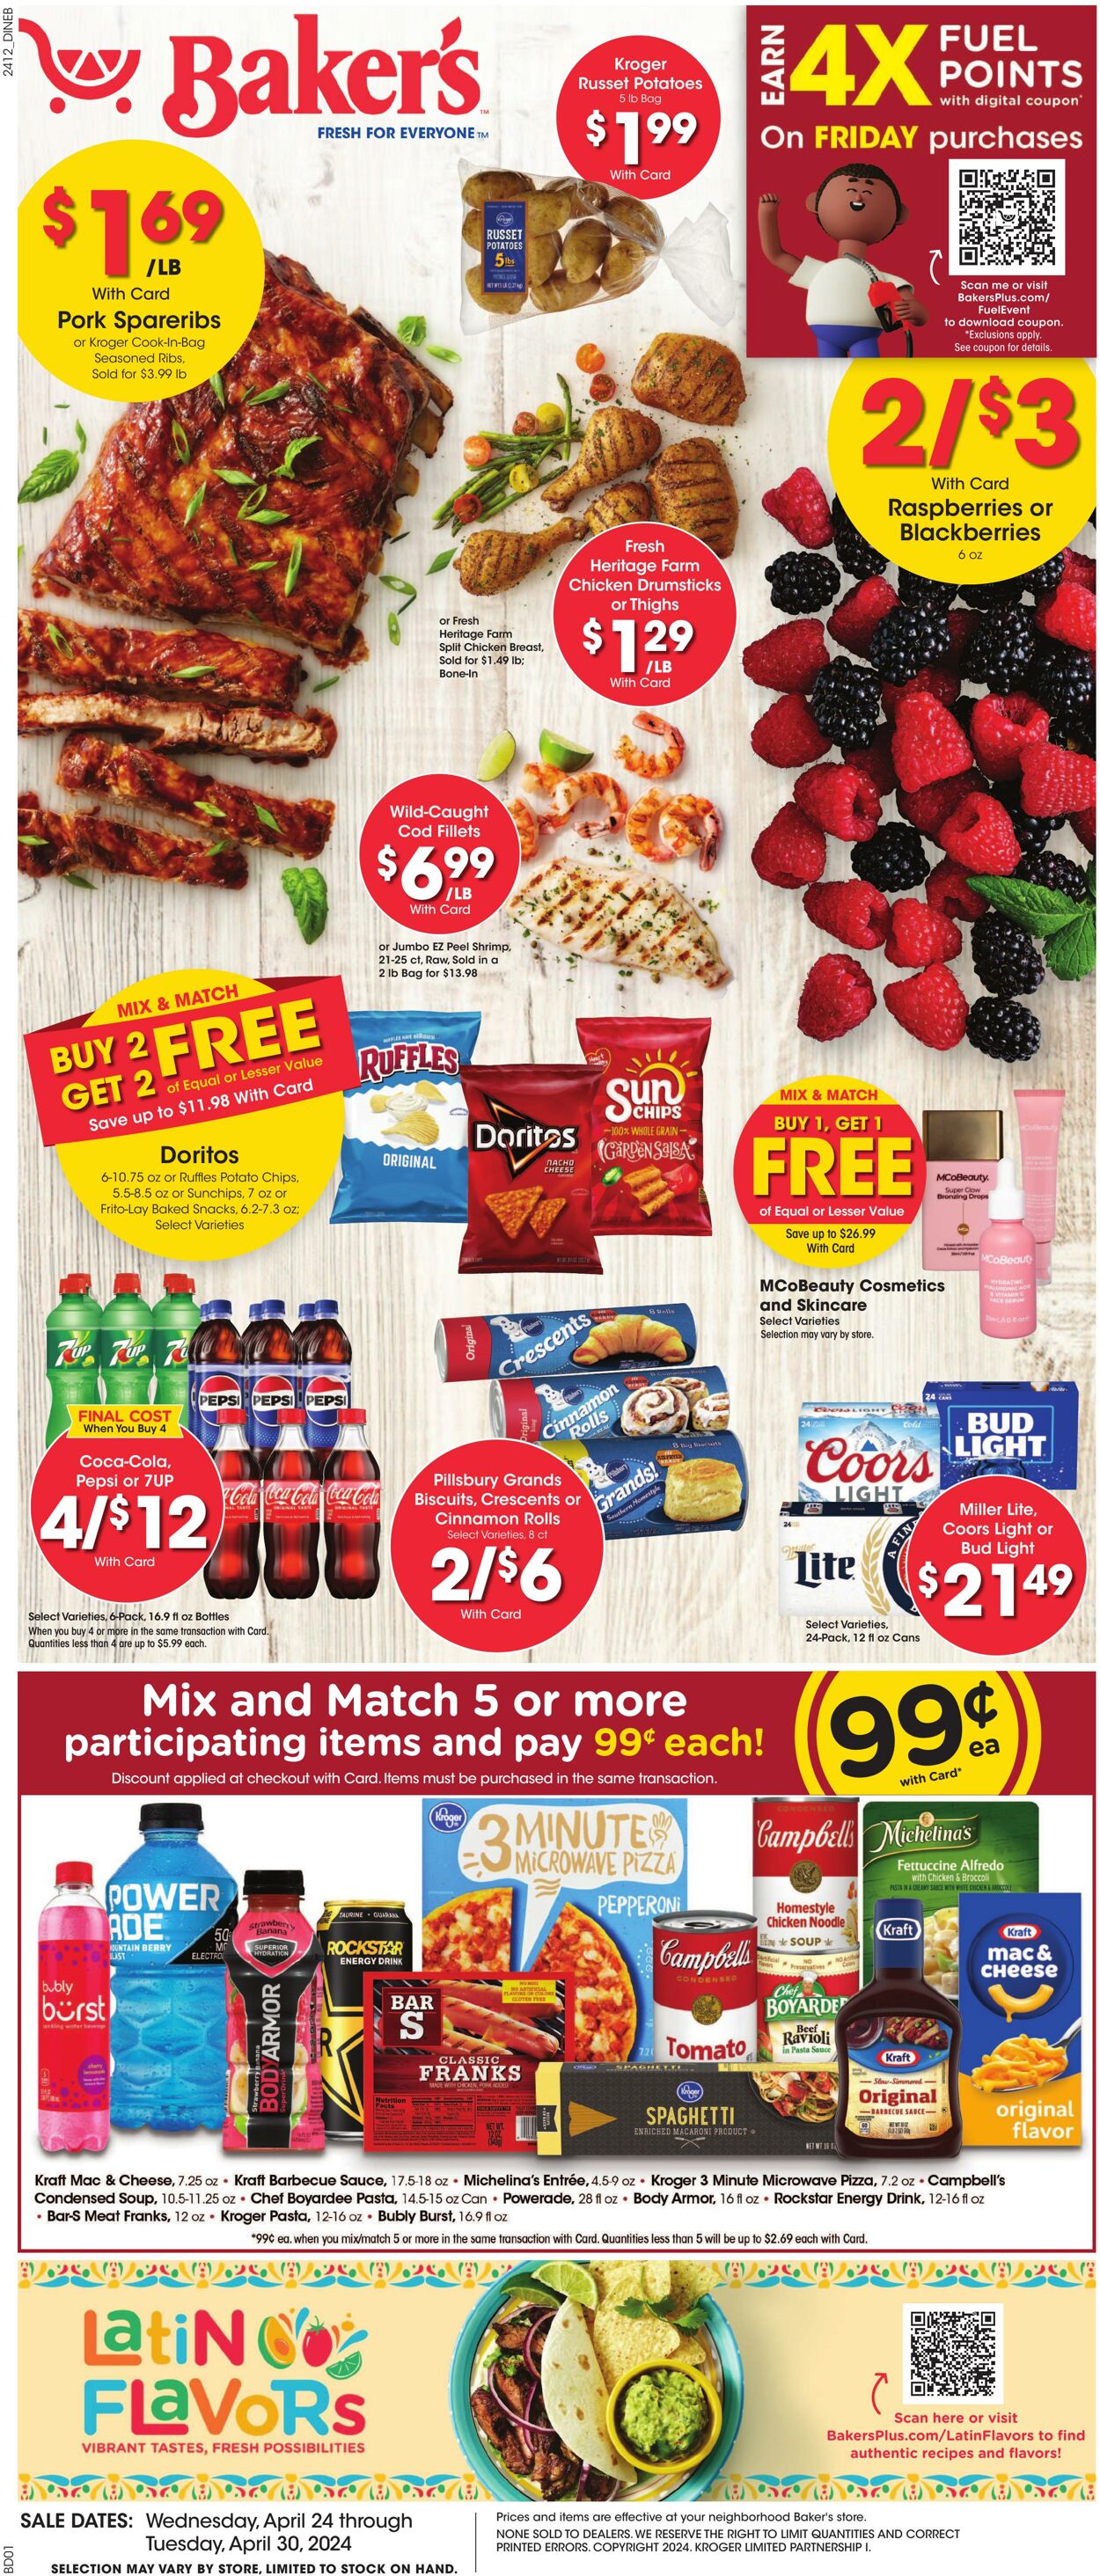 Baker's Promotional weekly ads